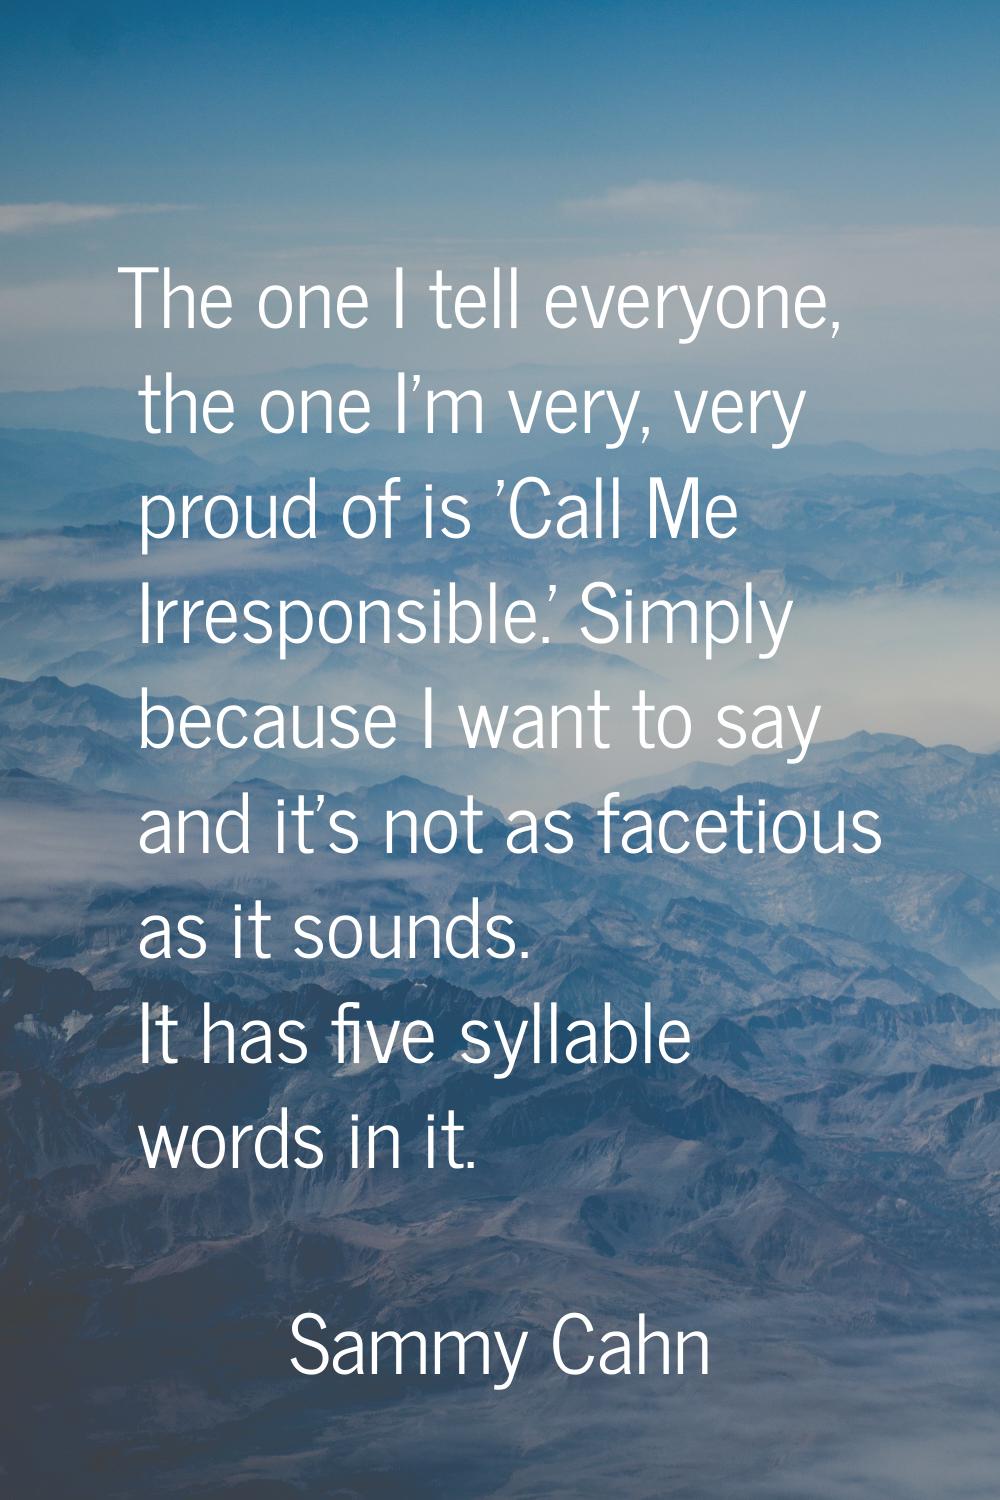 The one I tell everyone, the one I'm very, very proud of is 'Call Me Irresponsible.' Simply because